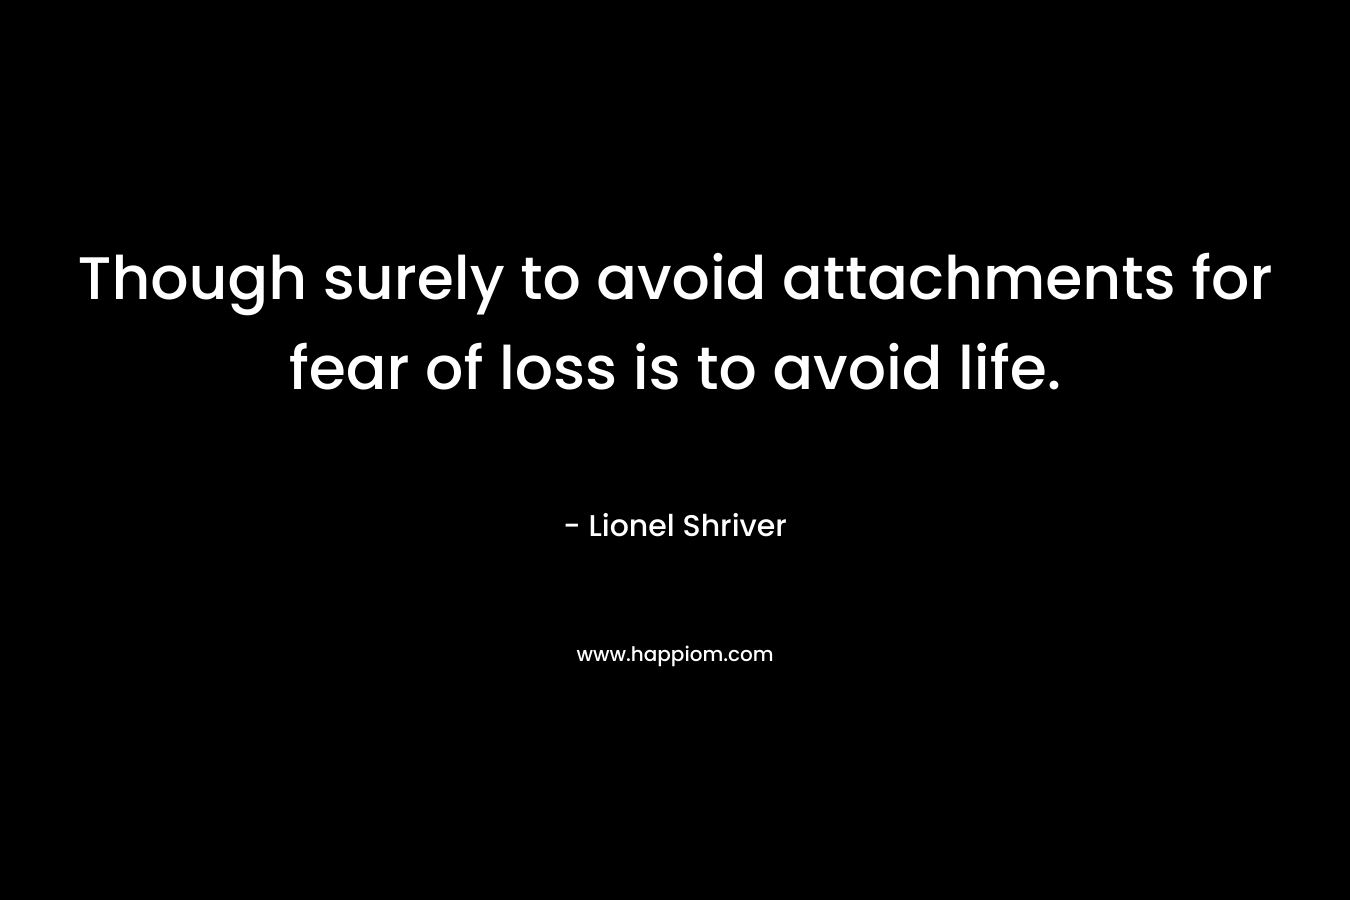 Though surely to avoid attachments for fear of loss is to avoid life.